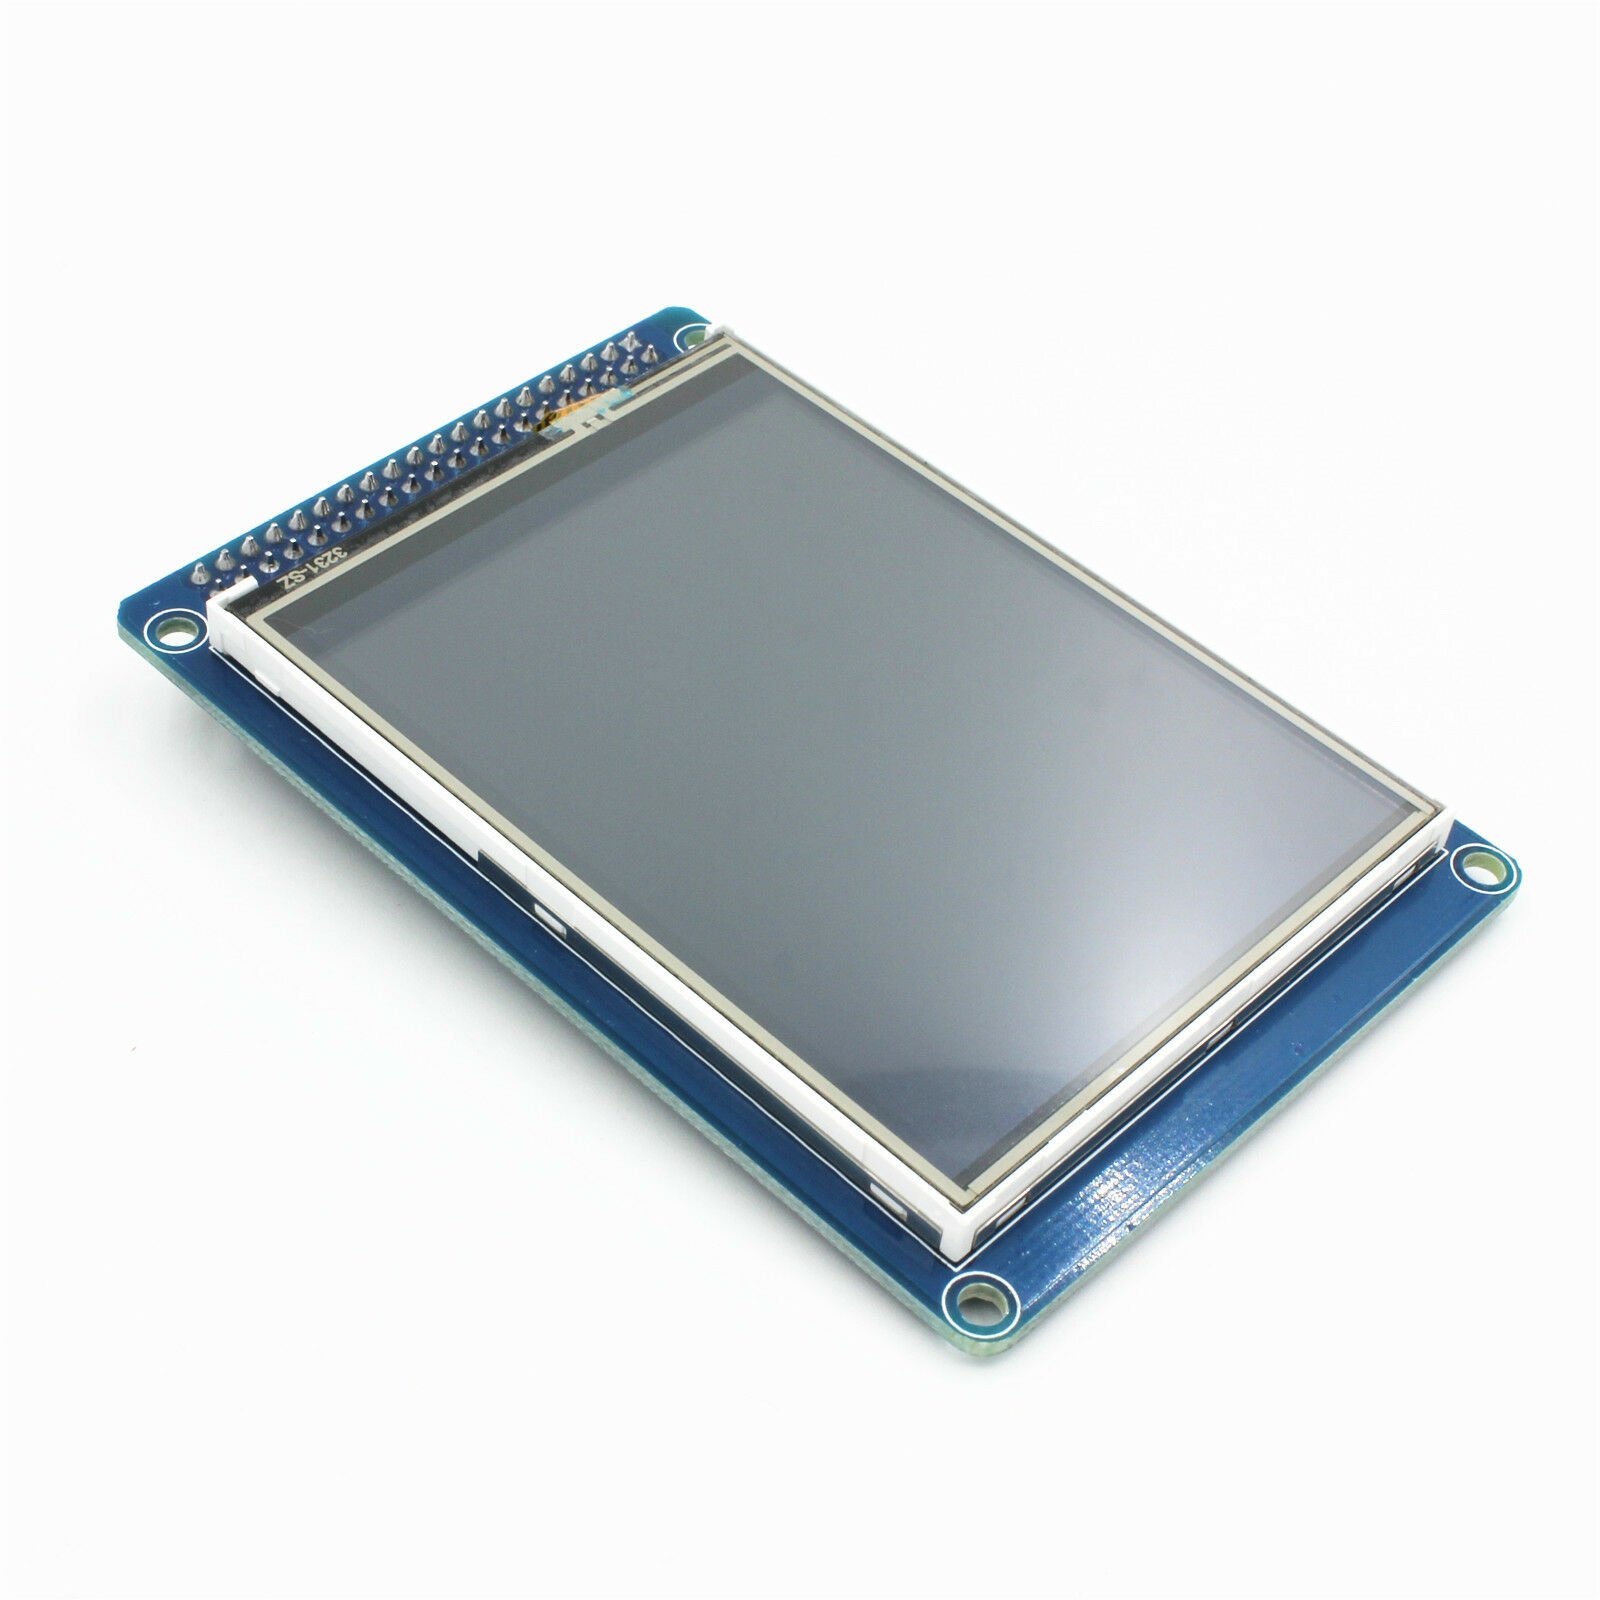 2.4 Inch Tft Touch Screen Module For Uno R3 Blue